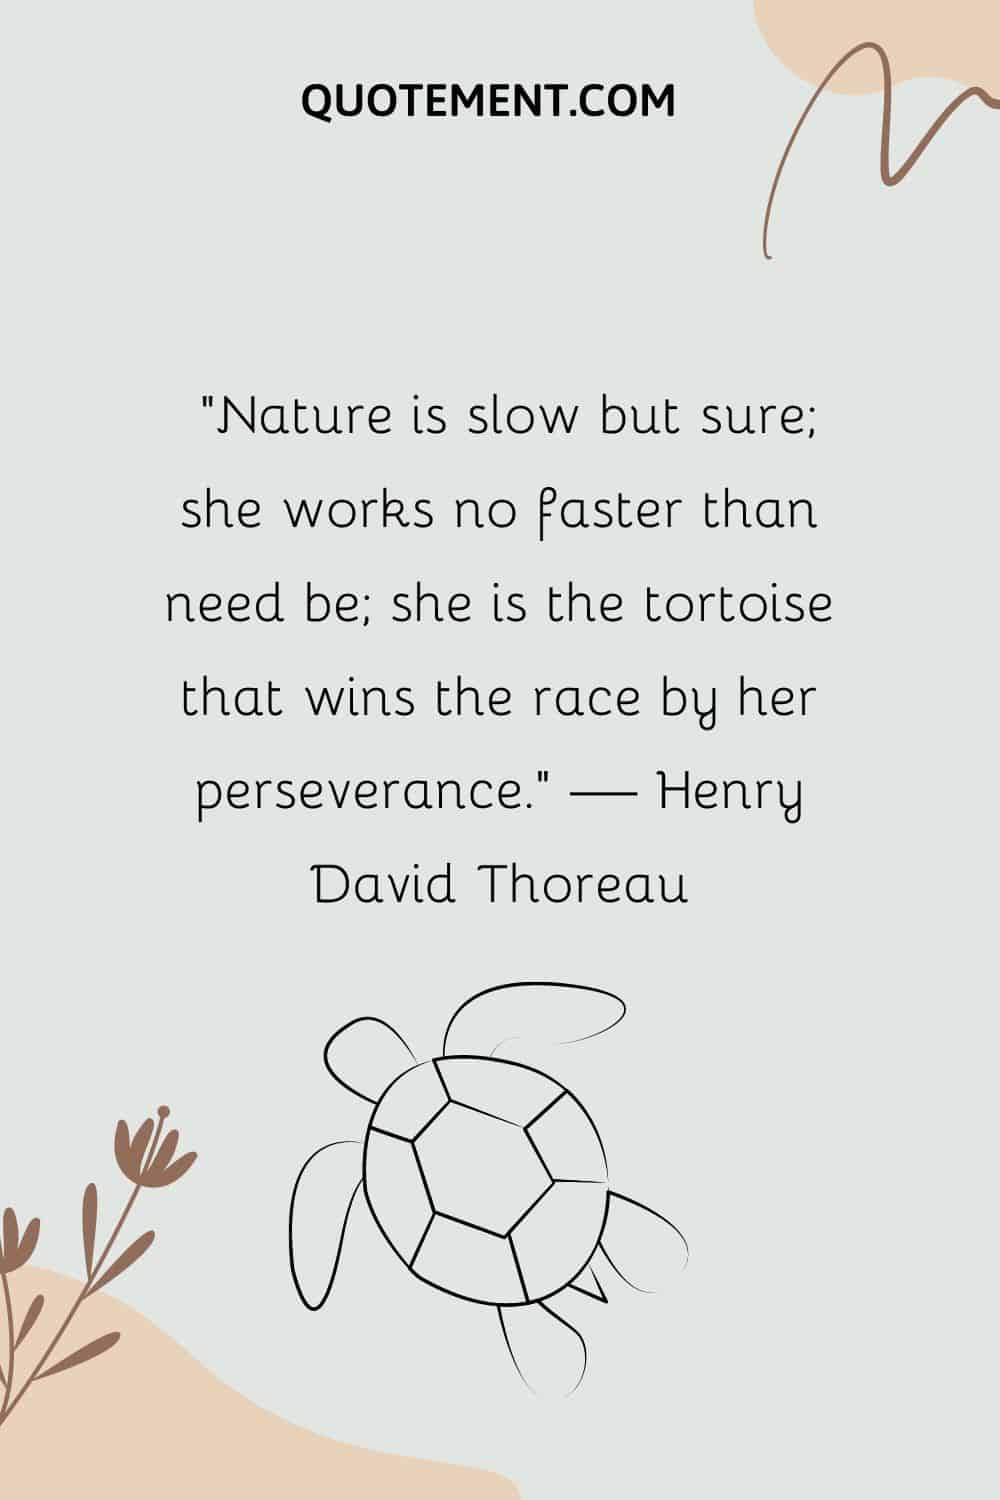 Nature is slow but sure; she works no faster than need be